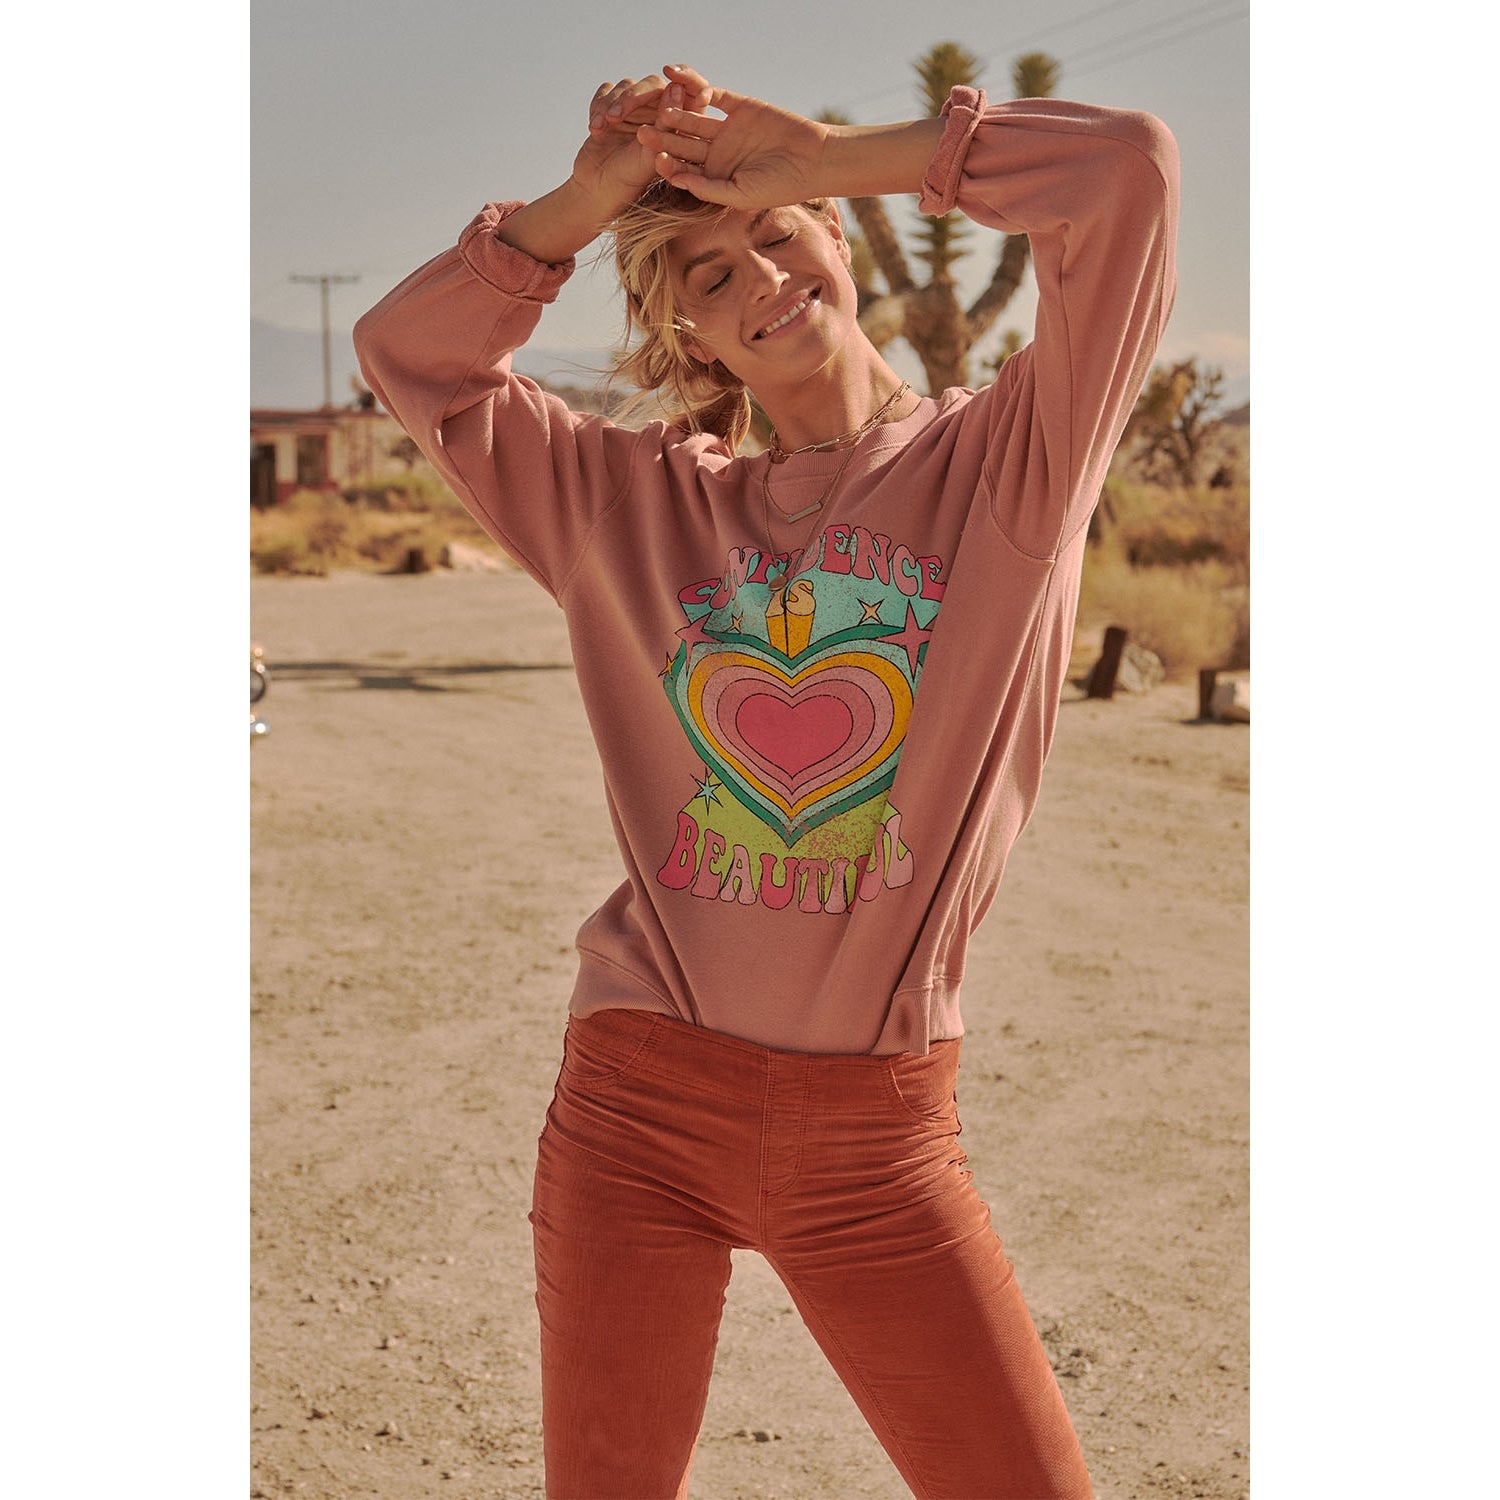 Promesa Confidence Is Beautiful Vintage Graphic Sweatshirt available at The Good Life Boutique